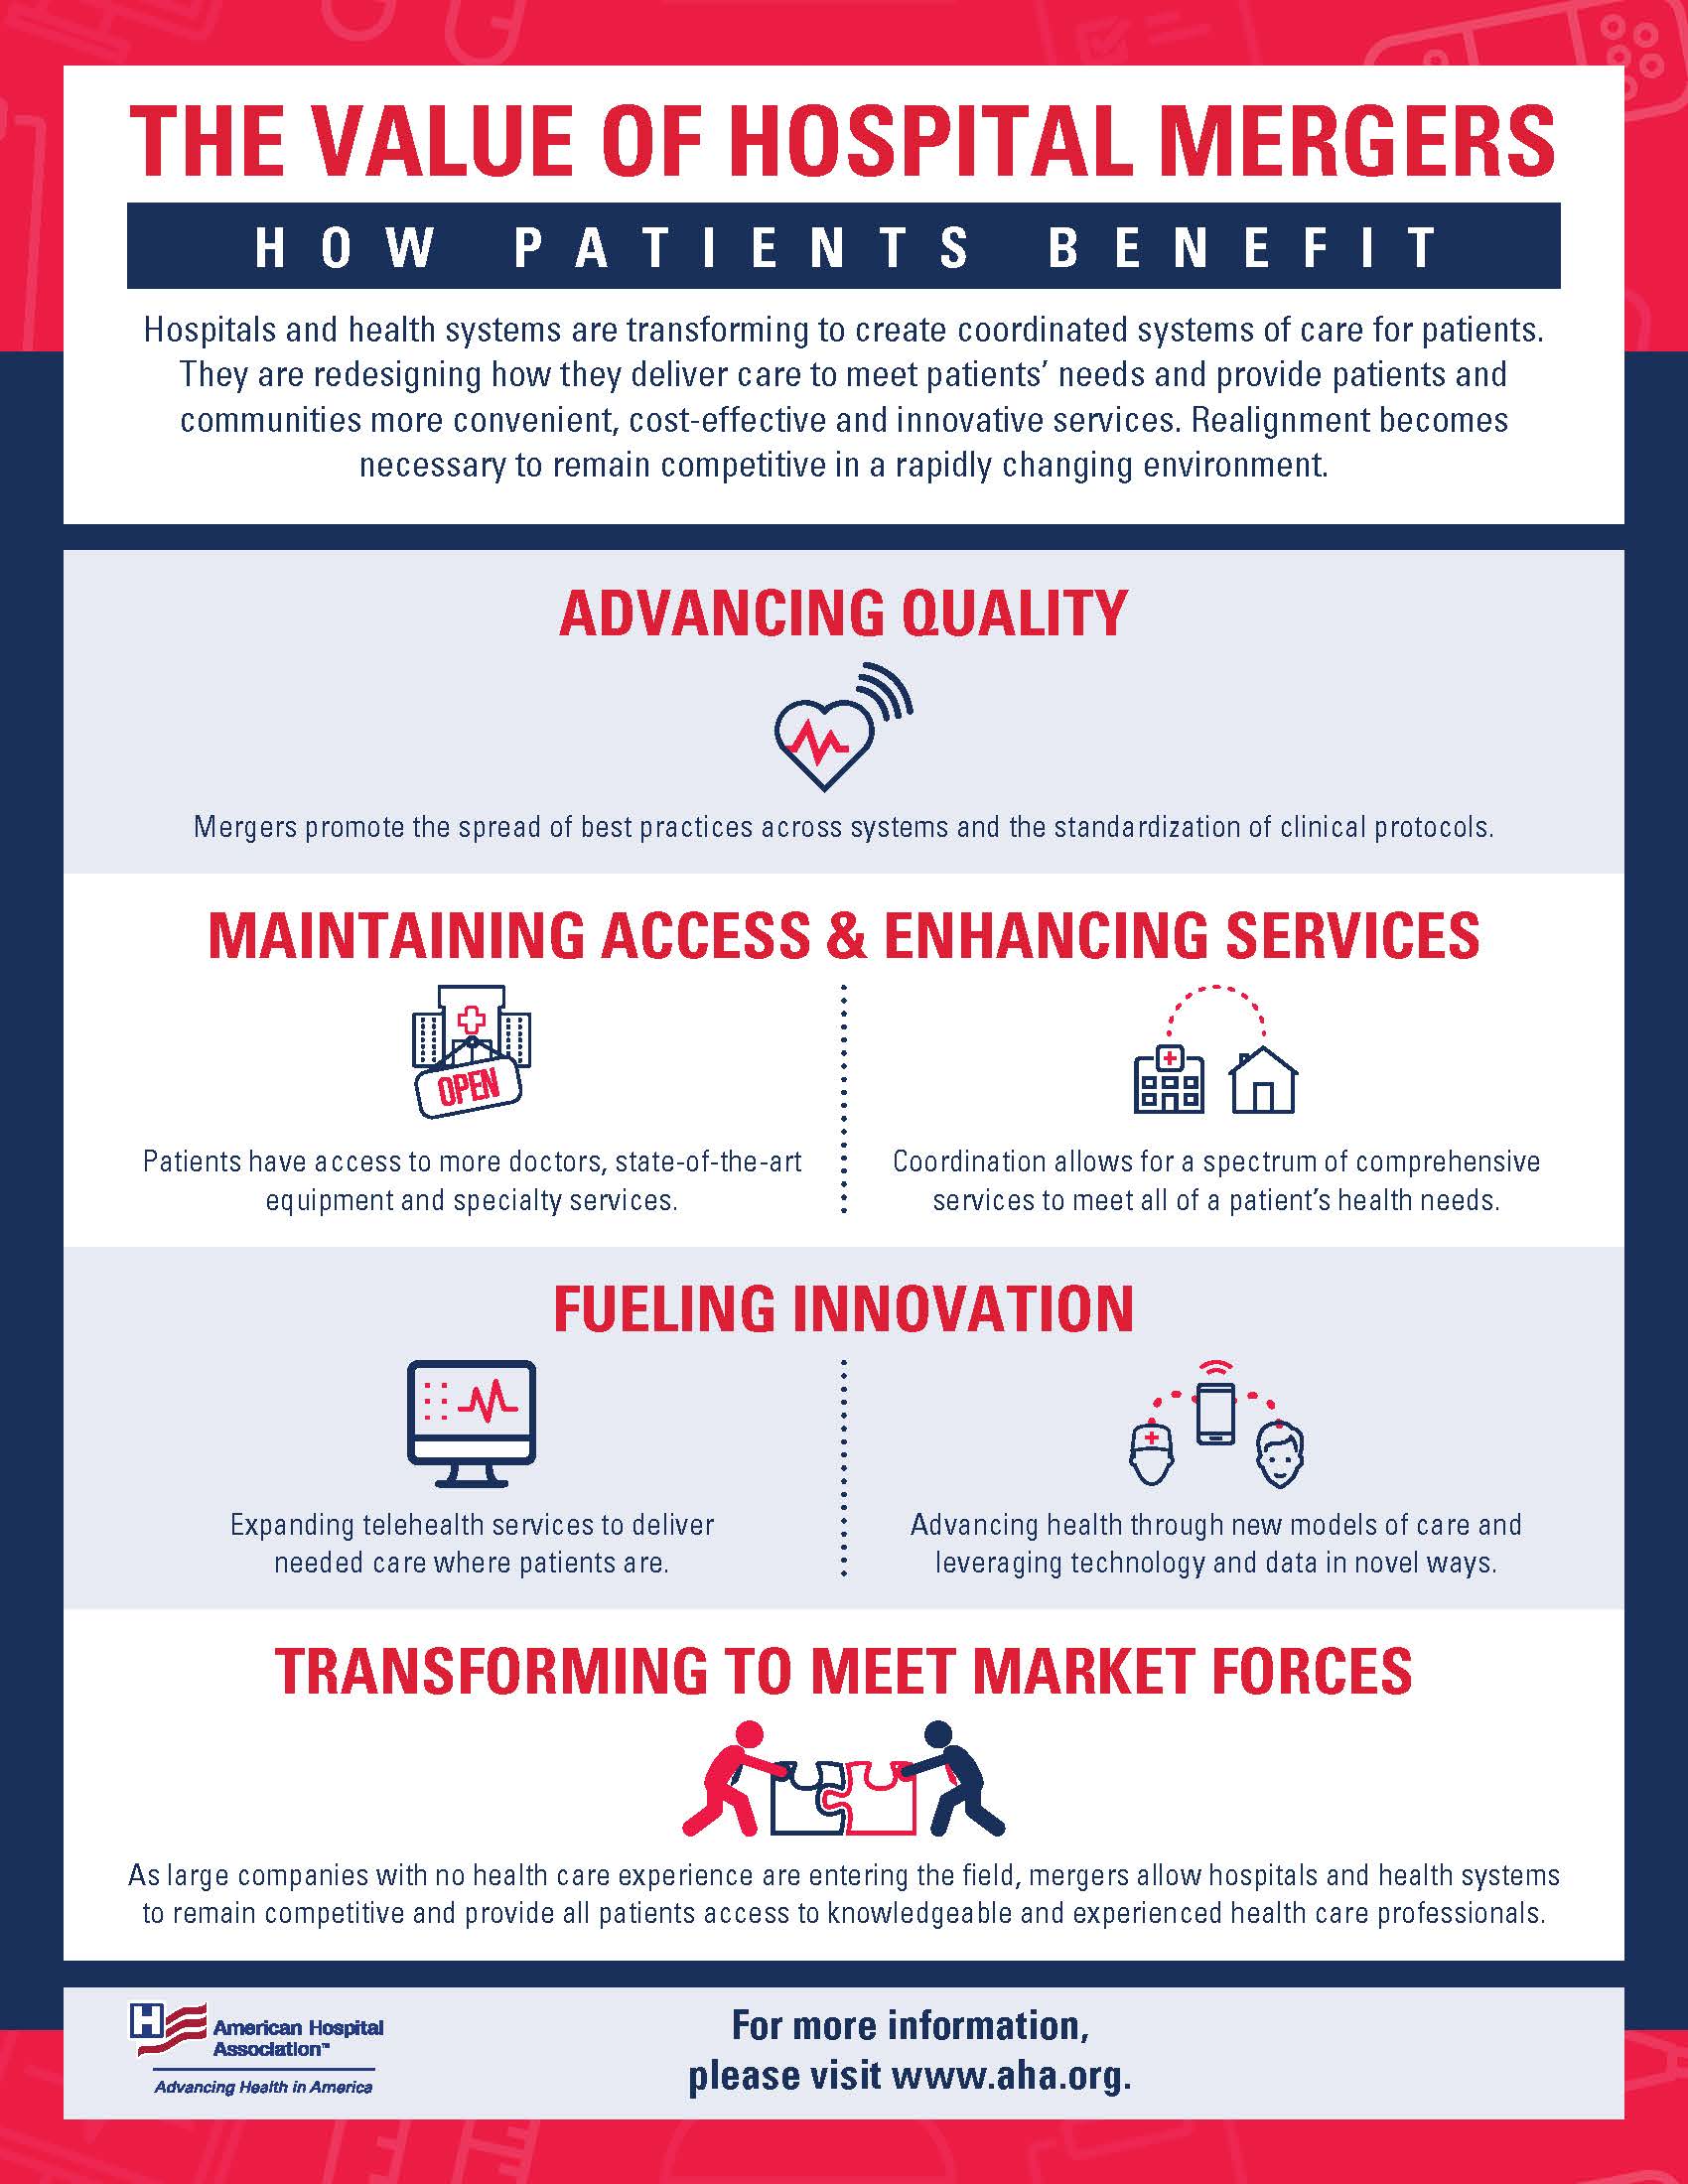 The Value of Hospital Mergers Infographic Image